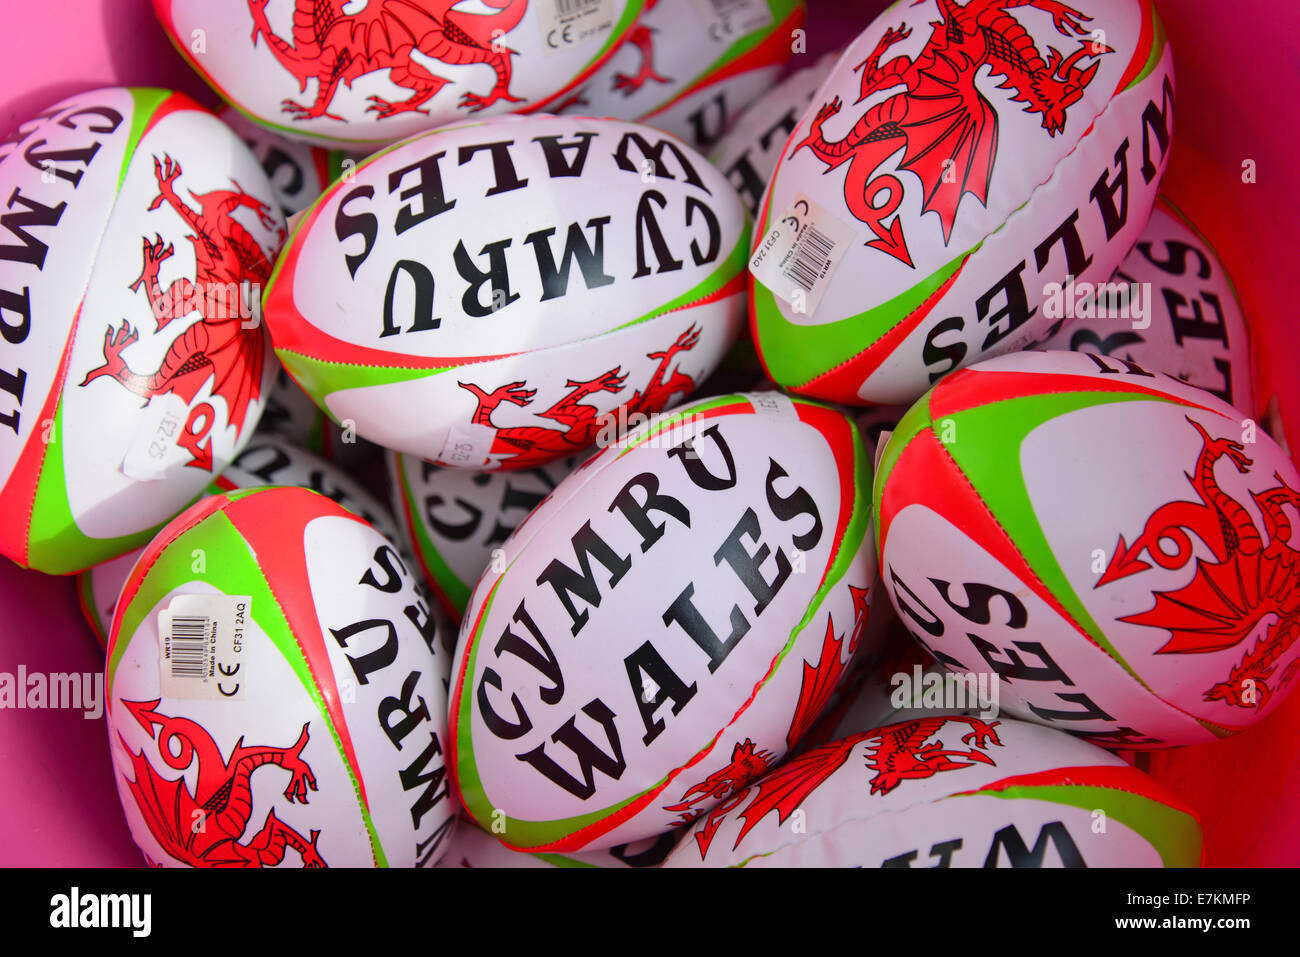 Welsh souvenir palle di rugby, Conwy, Conwy County Borough, Wales, Regno Unito Foto Stock